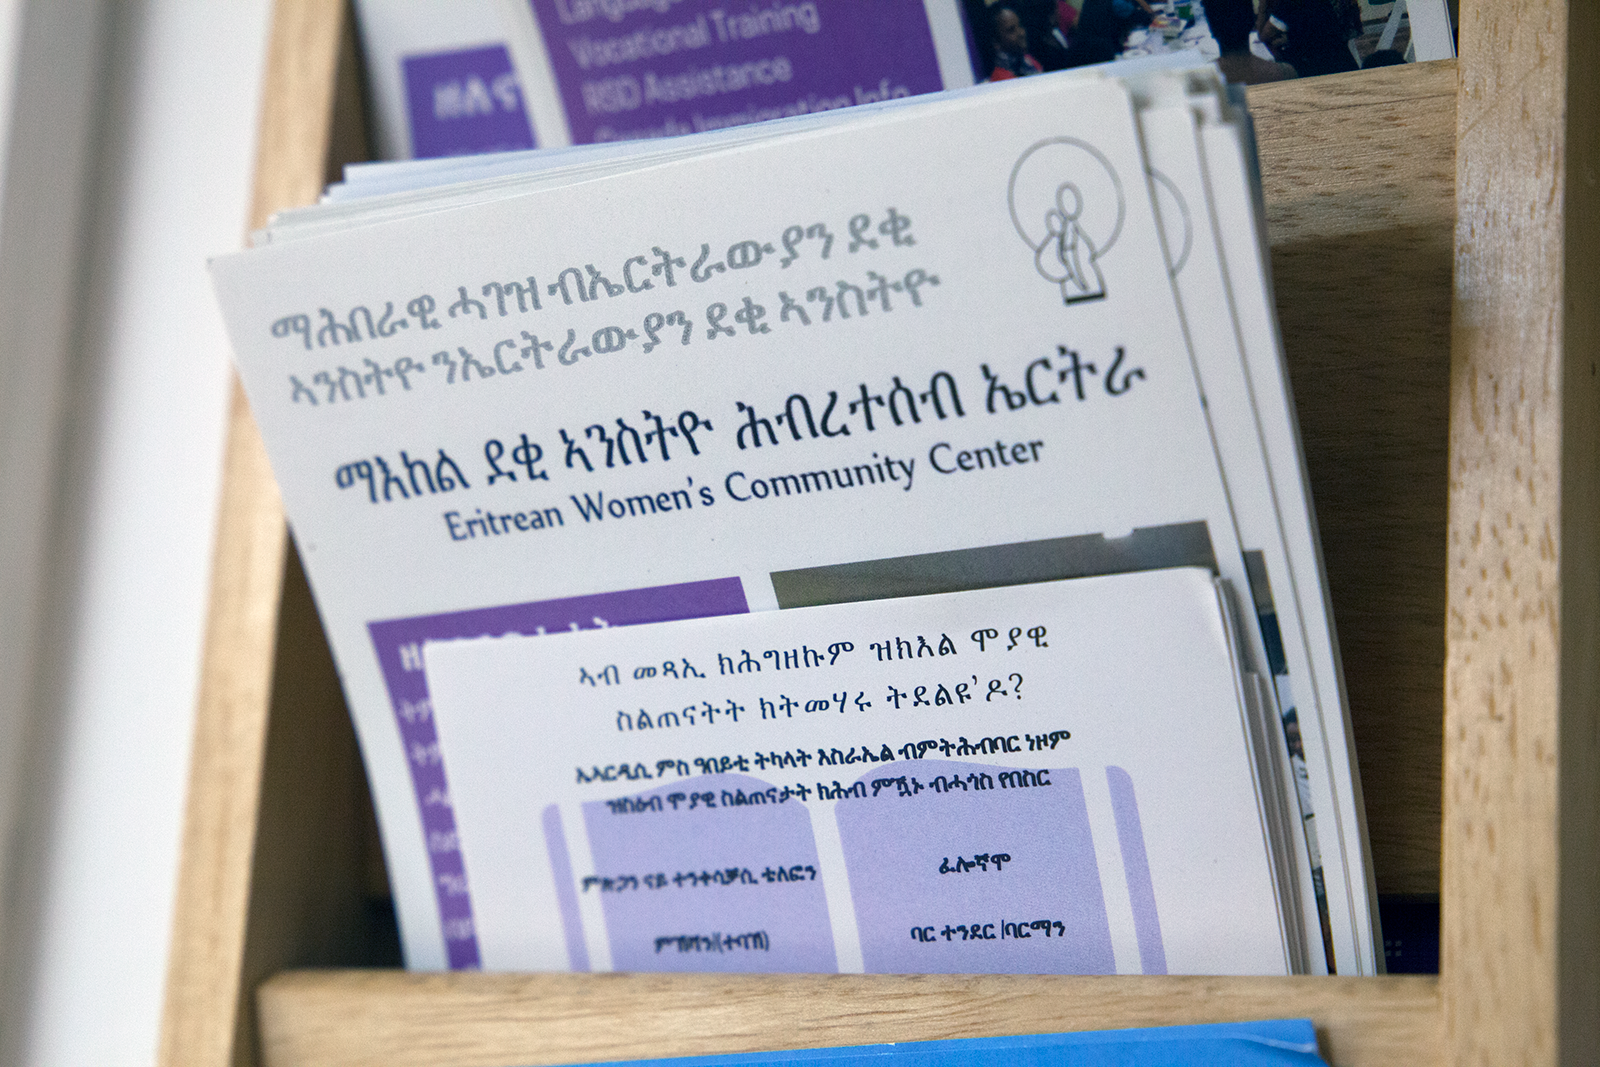 The Eritrean Women's Community Center in Tel Aviv, Israel, is a grassroots organization run by Eritrean women. It offers translation services and help with many issues asylum seekers face in Israel. Their services are largely targeted toward women and single mothers. Image by Caron Creighton. Israel, 2018.